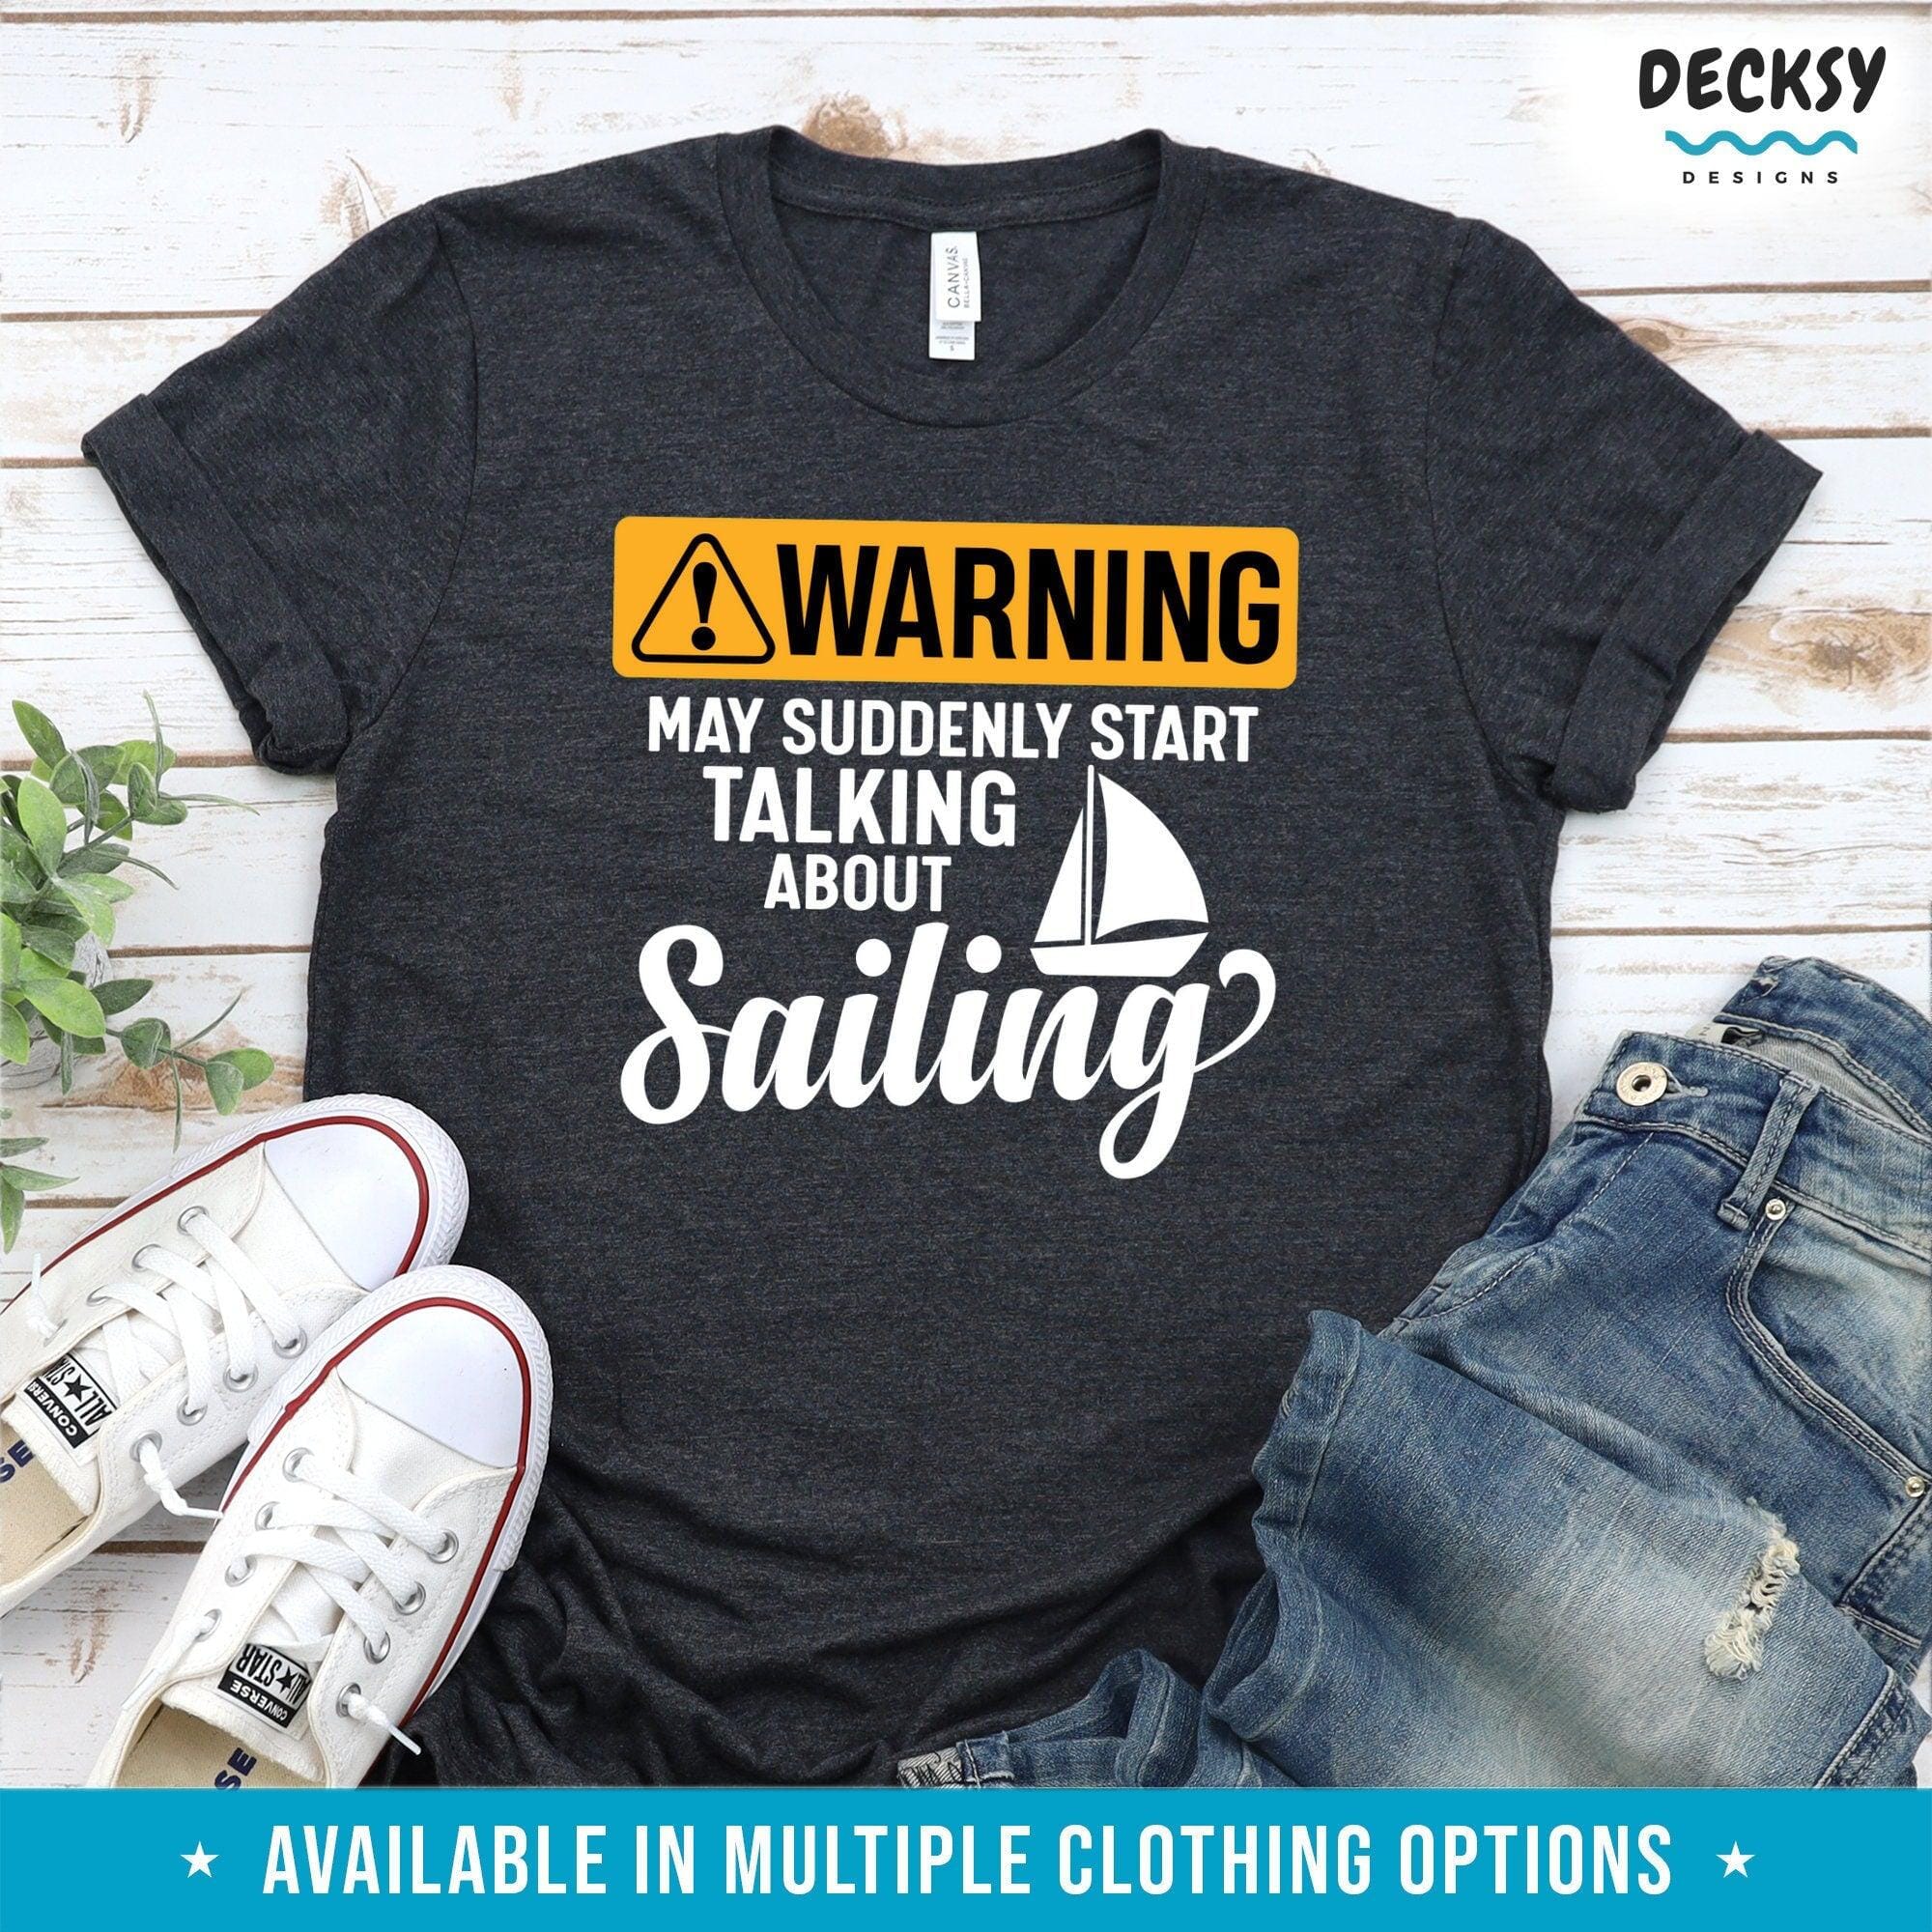 Sailing Shirt, Cruise Gifts For Sailor-Clothing:Gender-Neutral Adult Clothing:Tops & Tees:T-shirts:Graphic Tees-DecksyDesigns